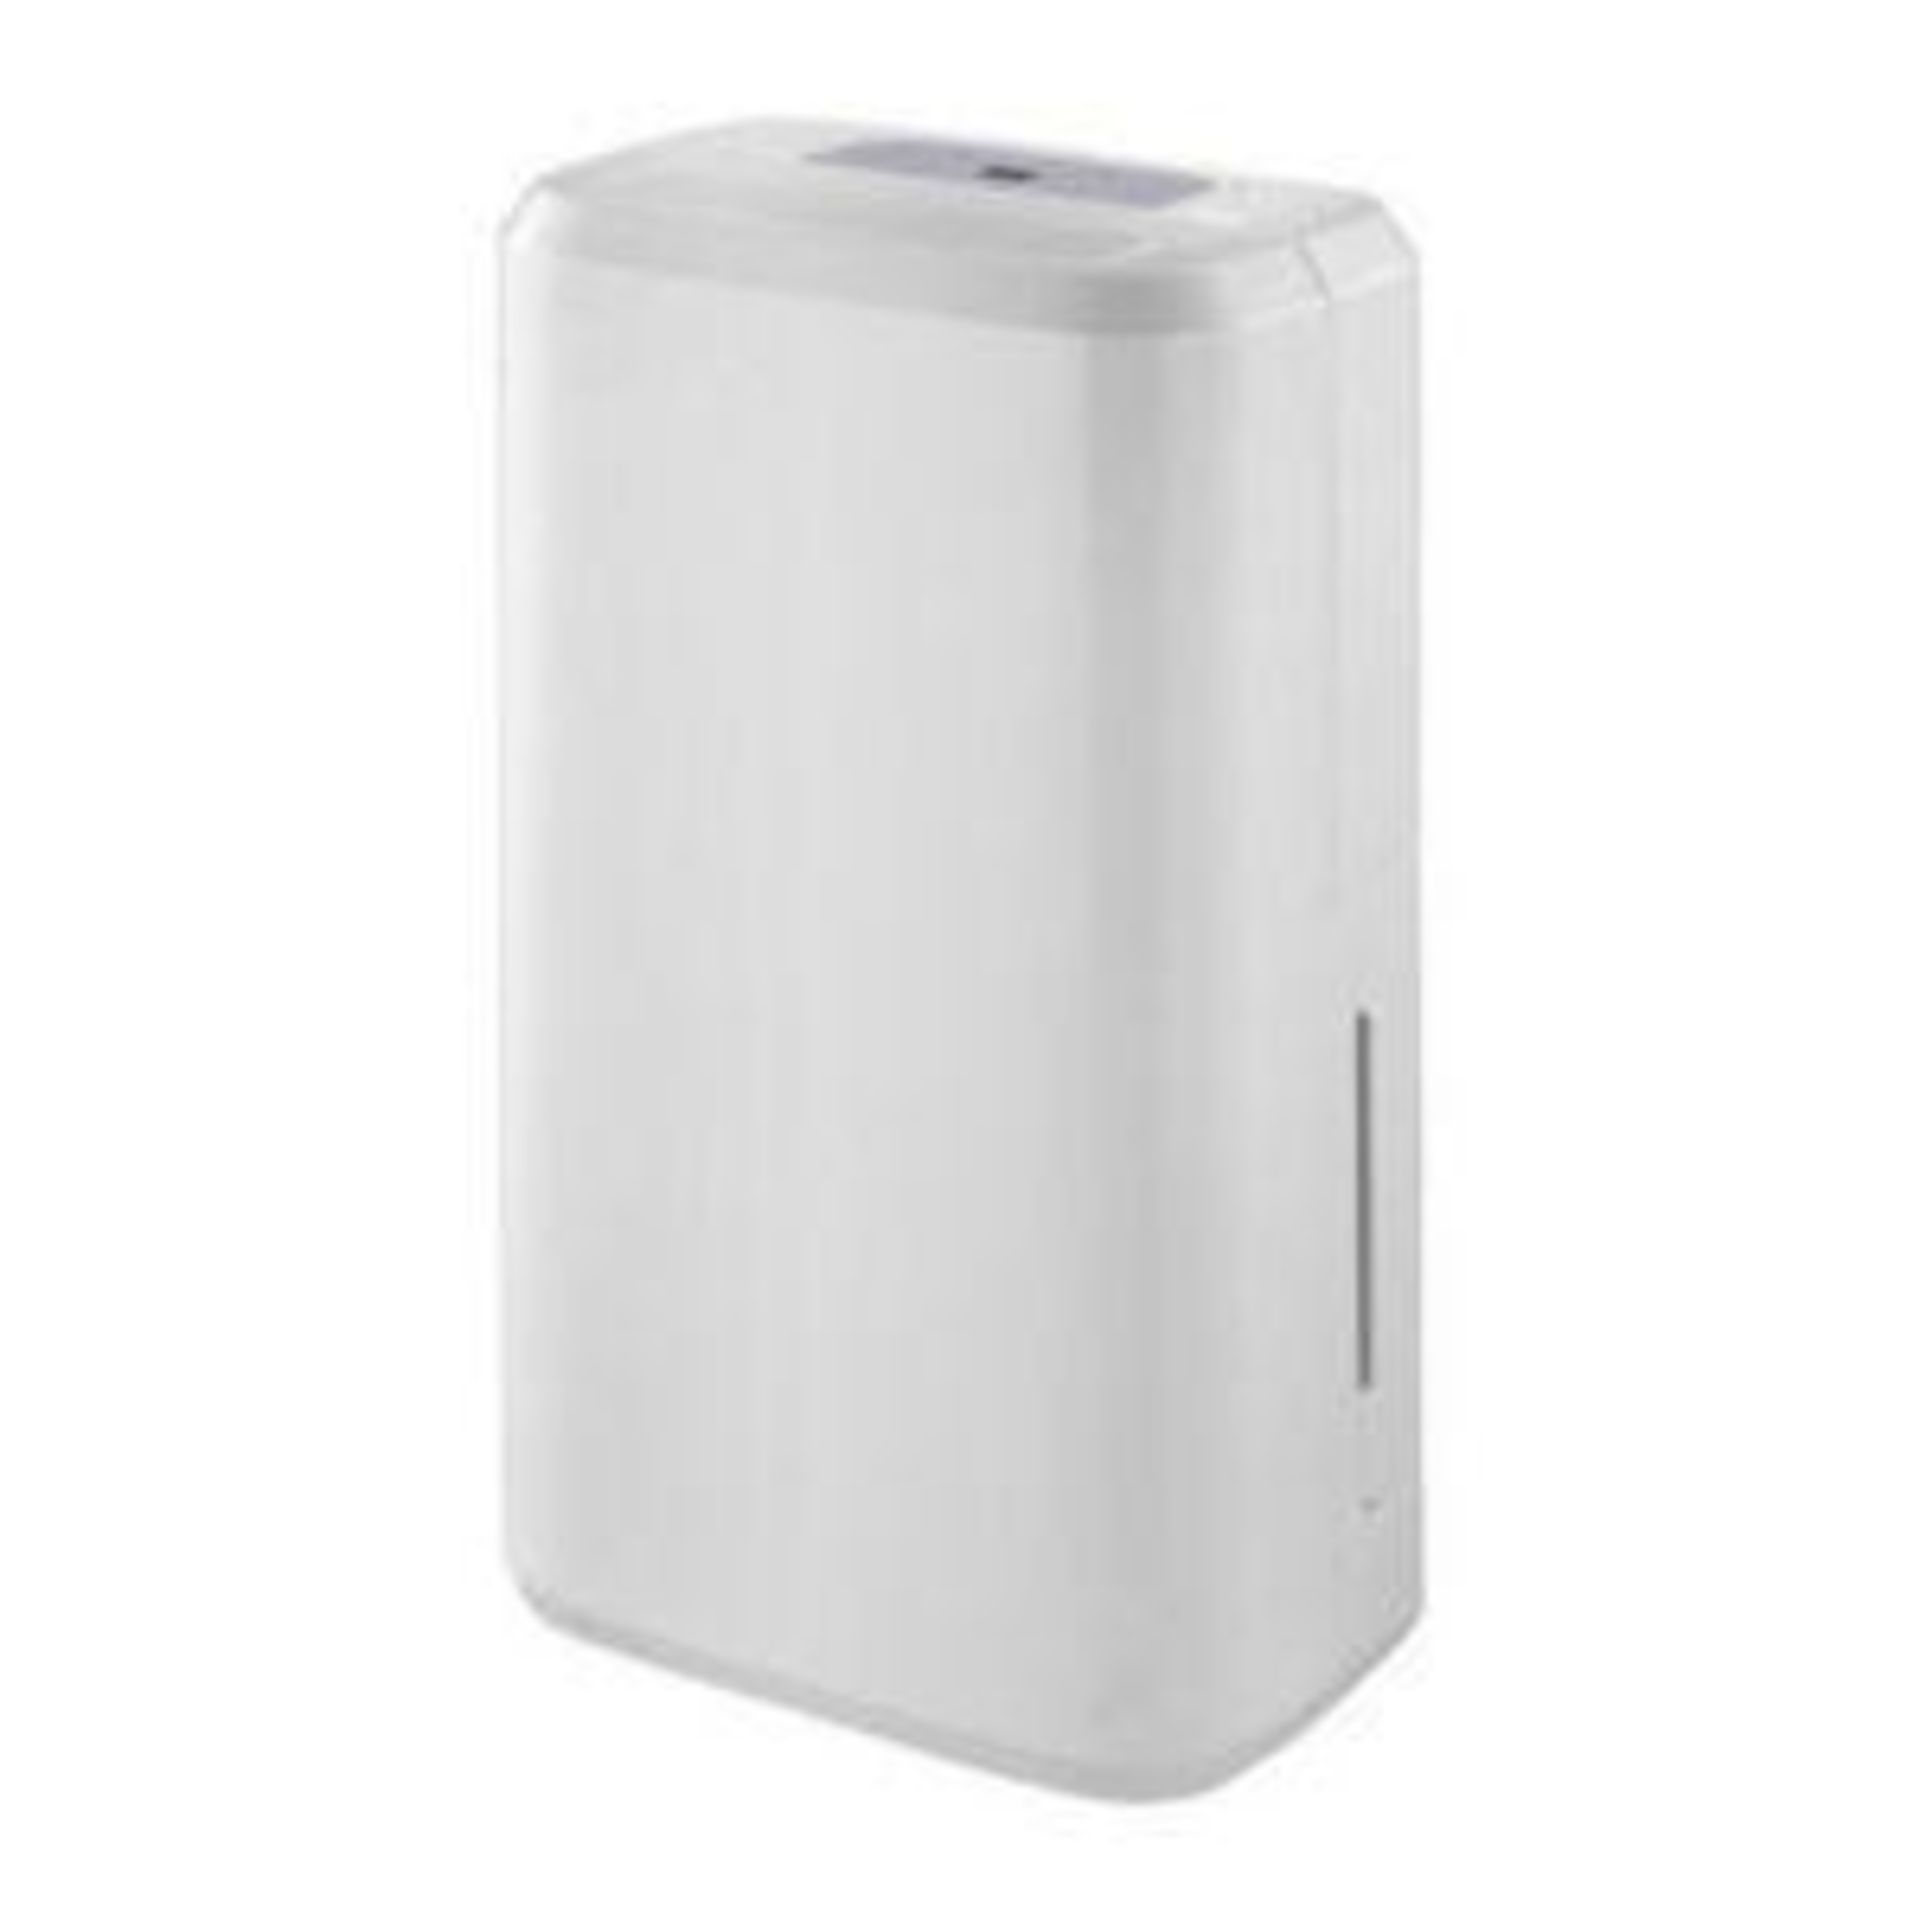 10L Dehumidifier - SR37. 10L Dehumidifier. This dehumidifier is ideal for removing excess moisture